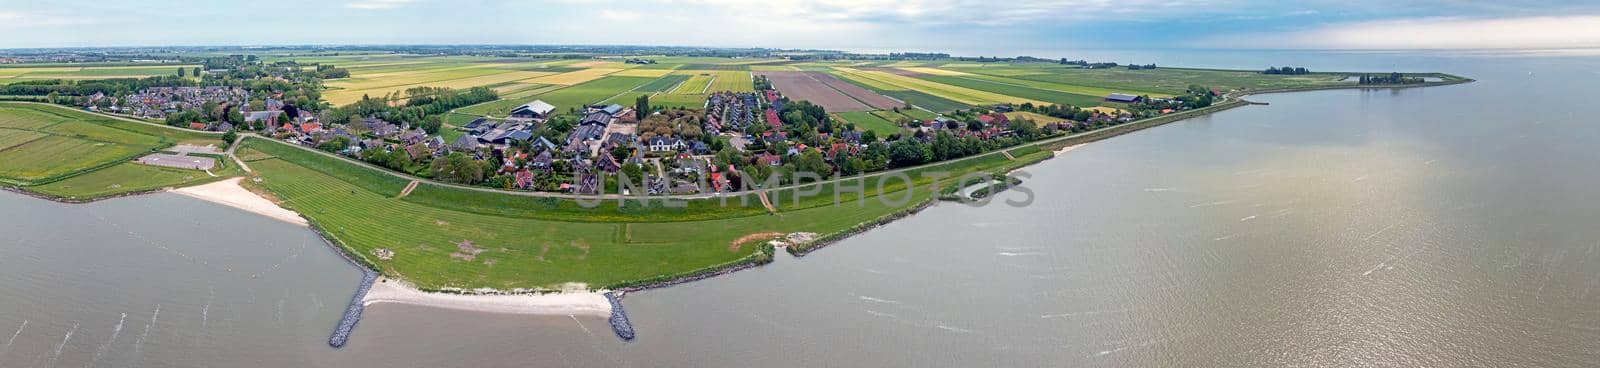 Aerial panorama from the village Schellinkhout at the IJsselmeer in the Netherlands by devy